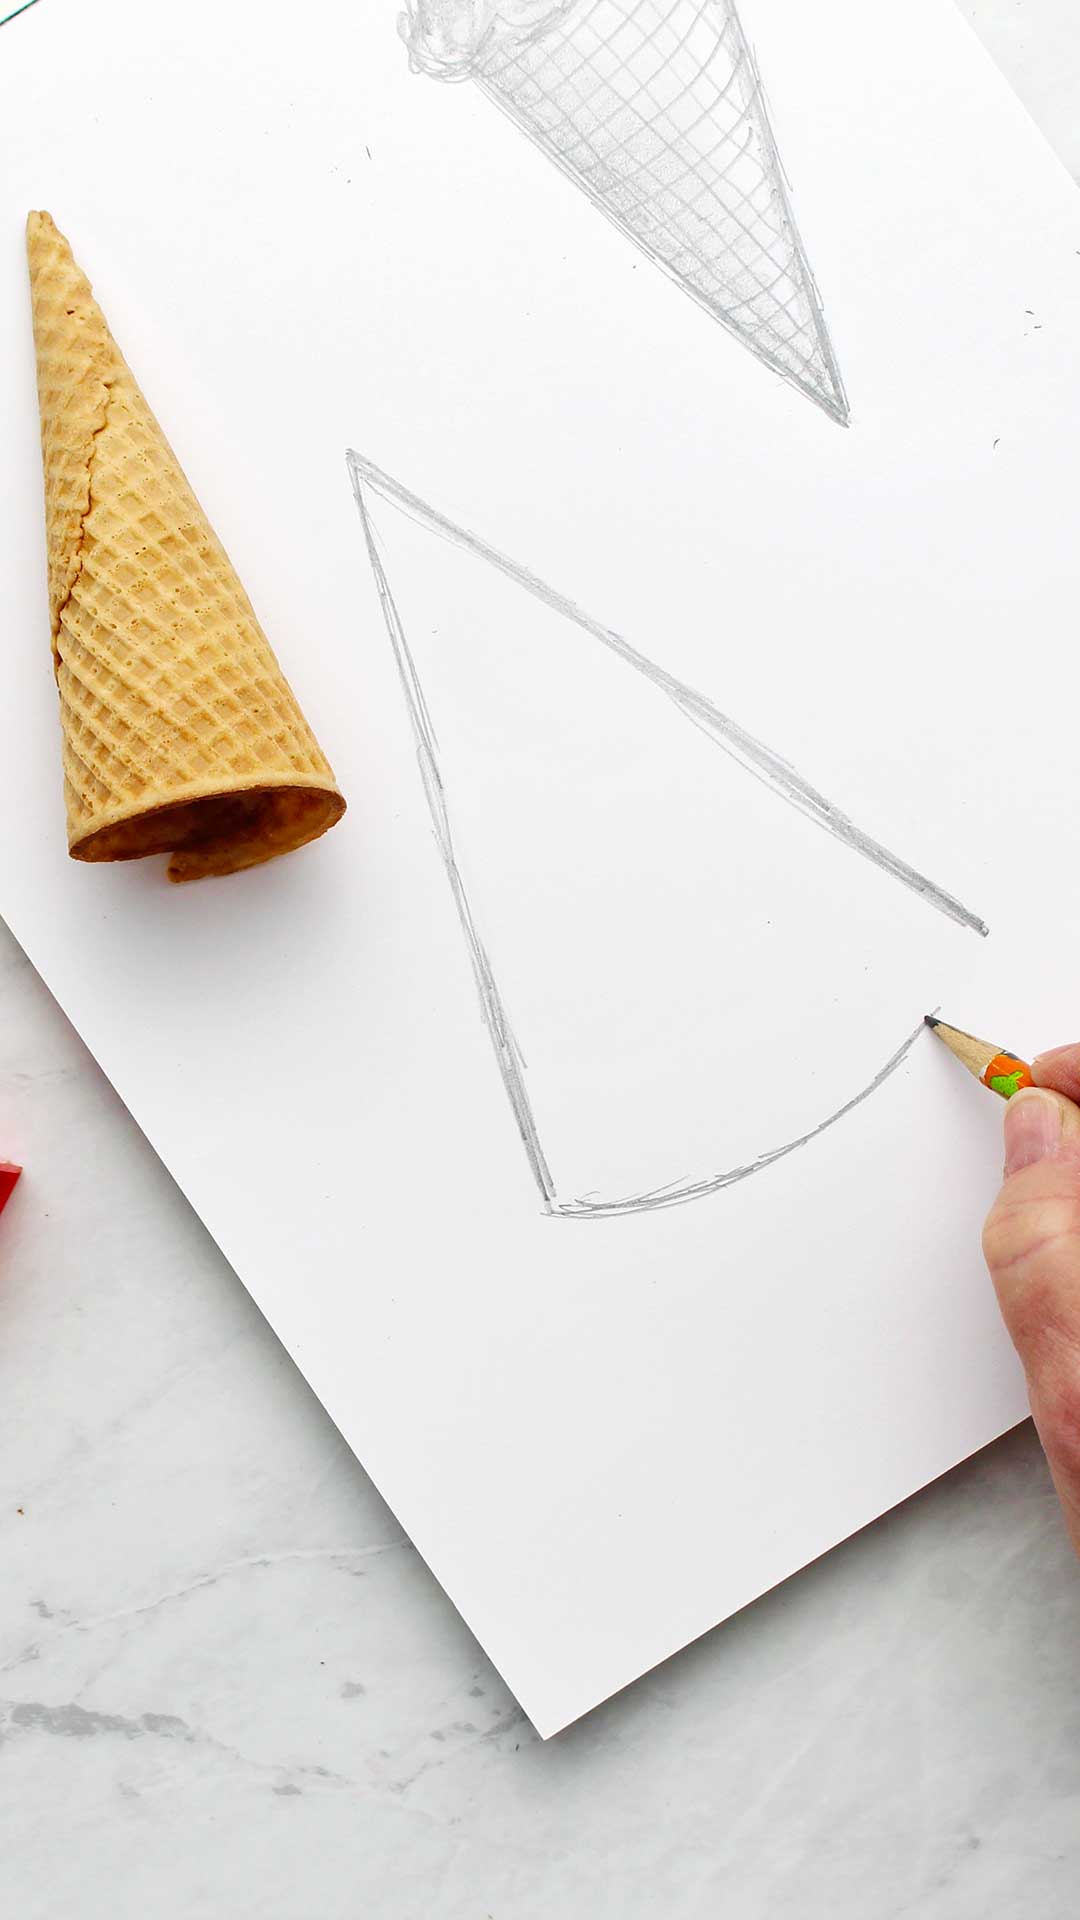 A hand sketching a cone with pencil with an ice cream cone near by as a visual aid.